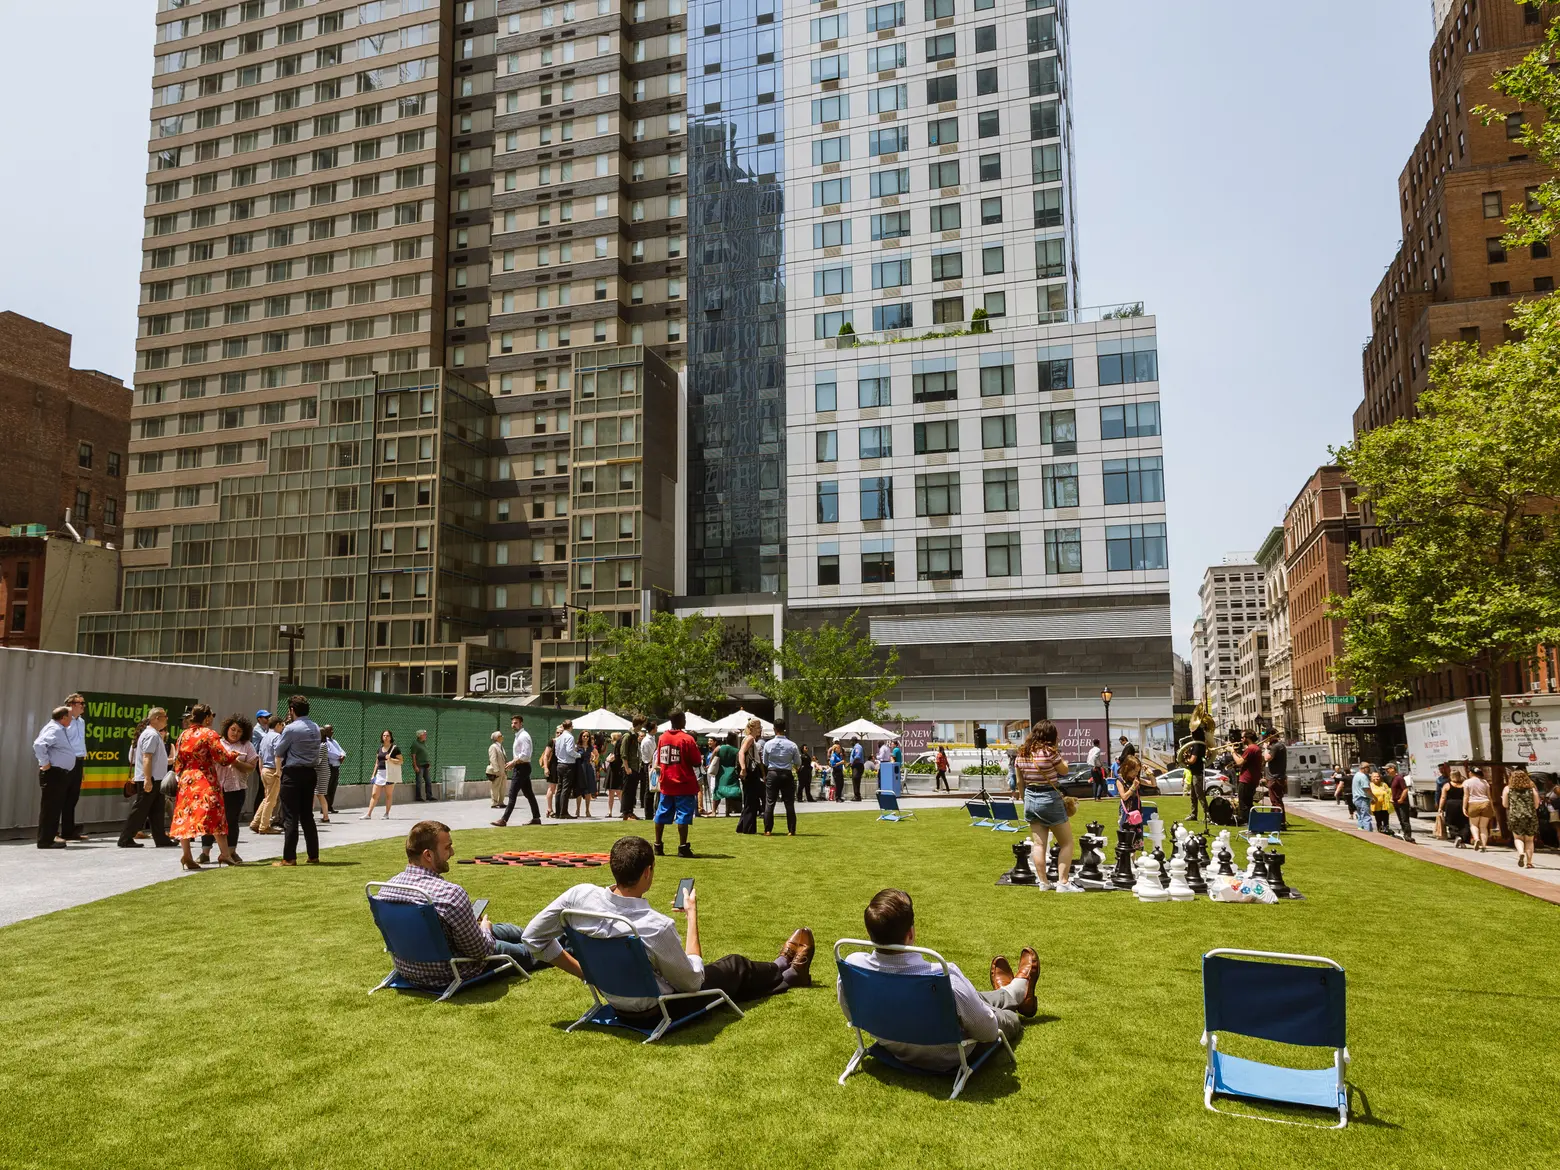 Temporary “pop-up park” opens at future site of Willoughby Square Park